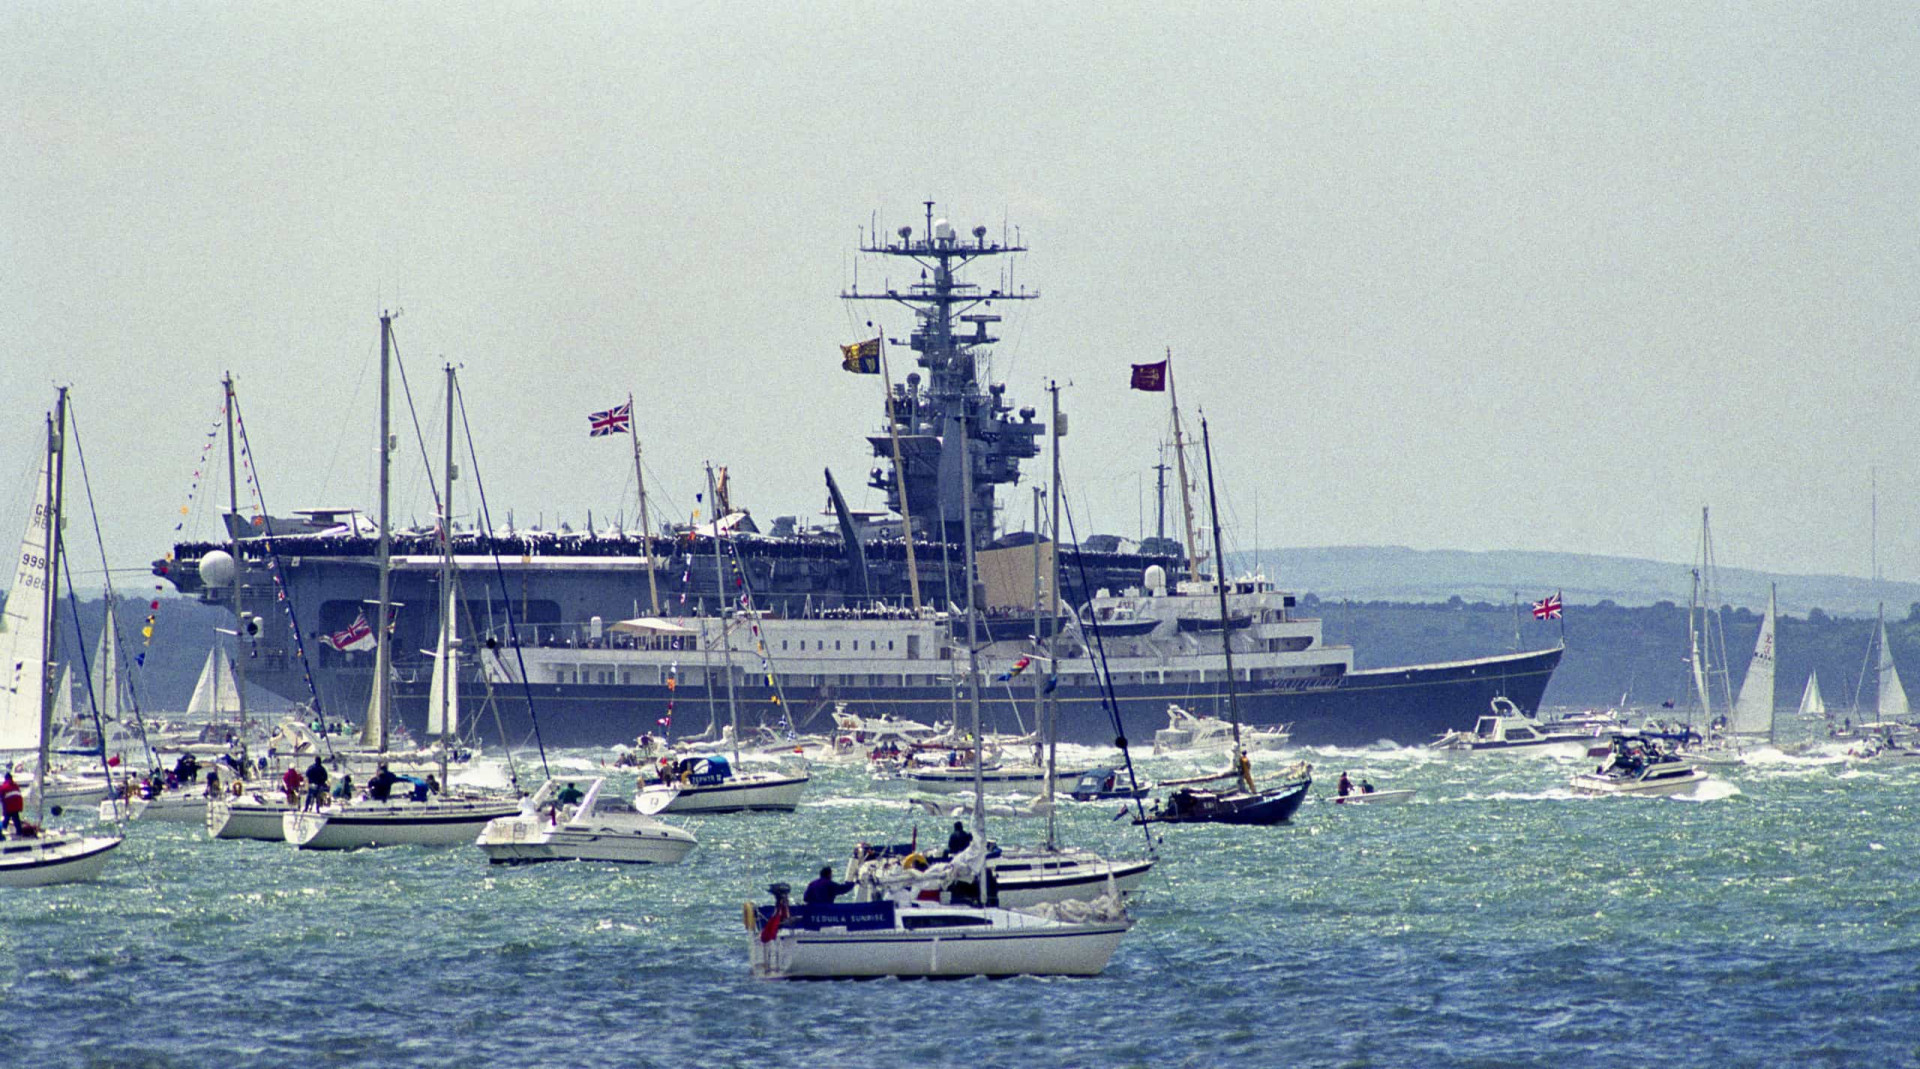 <p>June 6, 1994 marked the 50th anniversary of the D-Day landings in Normandy. To mark the historic occasion, <em>Britannia</em> and her royal passengers joined a colorful fleet review off Portsmouth and Gosport, in southern England.</p><p>You may also like:<a href="https://www.starsinsider.com/n/425531?utm_source=msn.com&utm_medium=display&utm_campaign=referral_description&utm_content=474709v3en-ph"> Take the coronavirus quiz: Are you overreacting or being safe?</a></p>